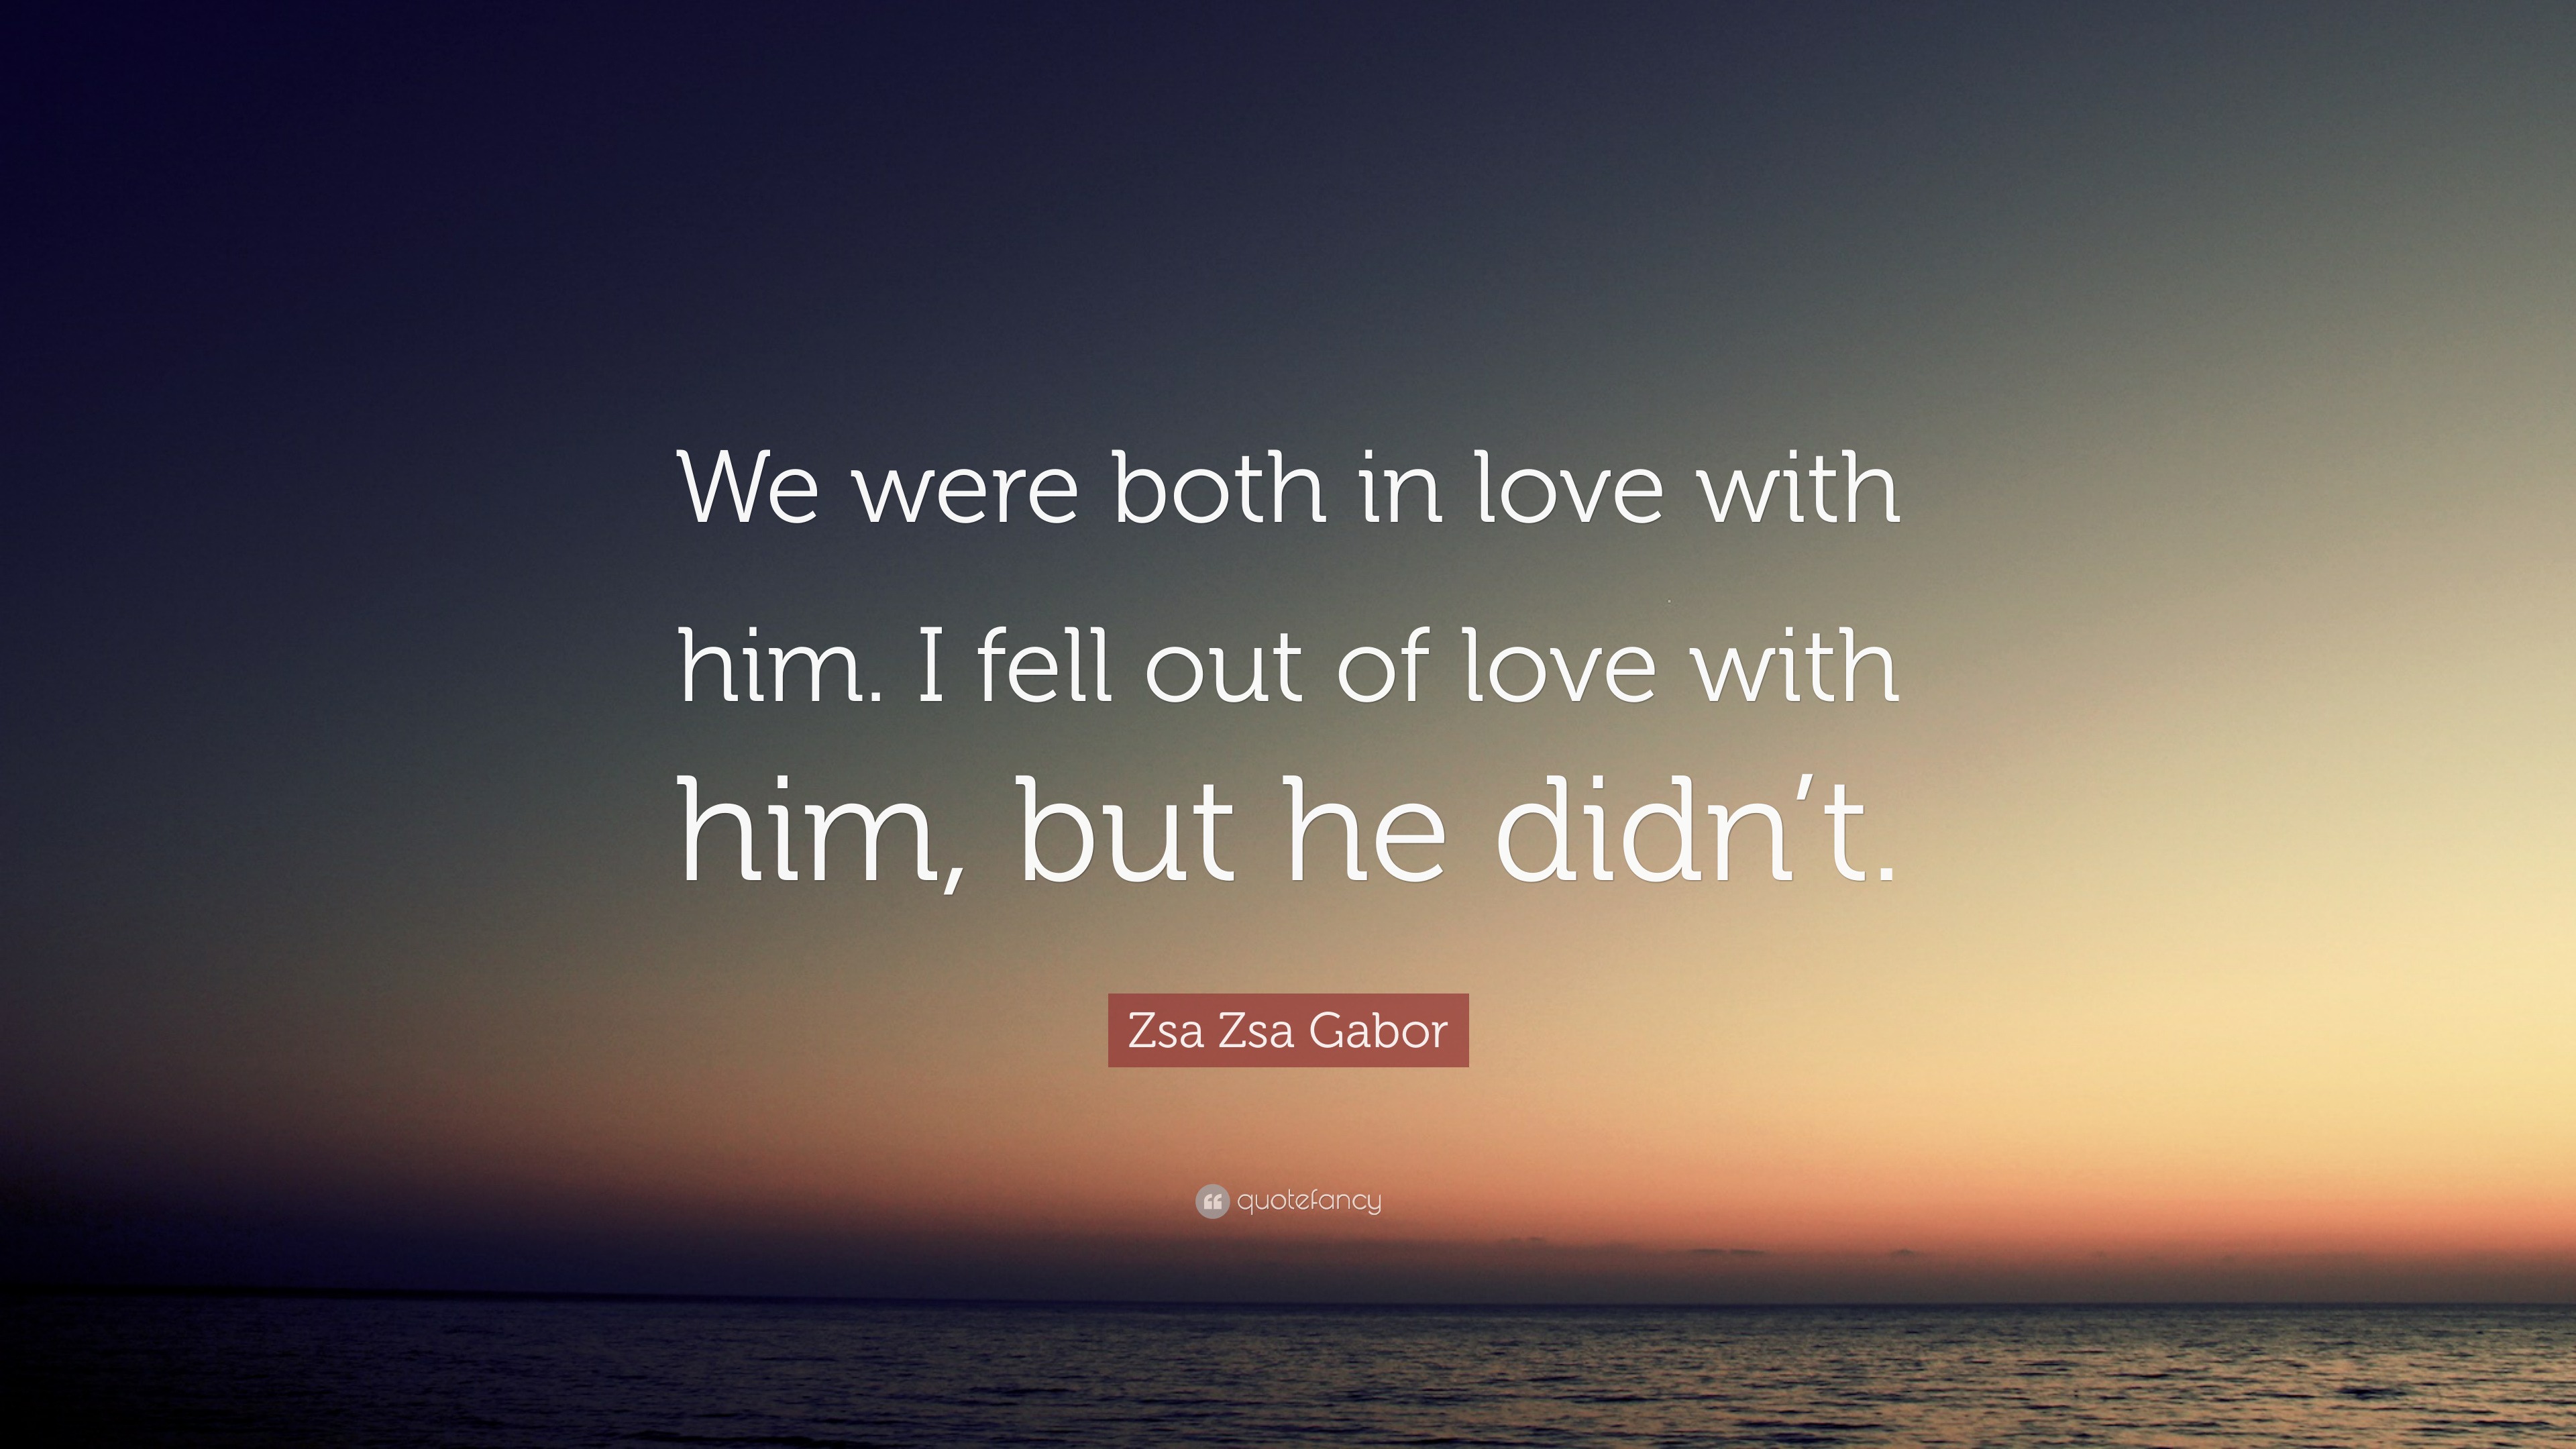 Zsa Zsa Gabor Quote: “We were both in love with him. I fell out of love ...